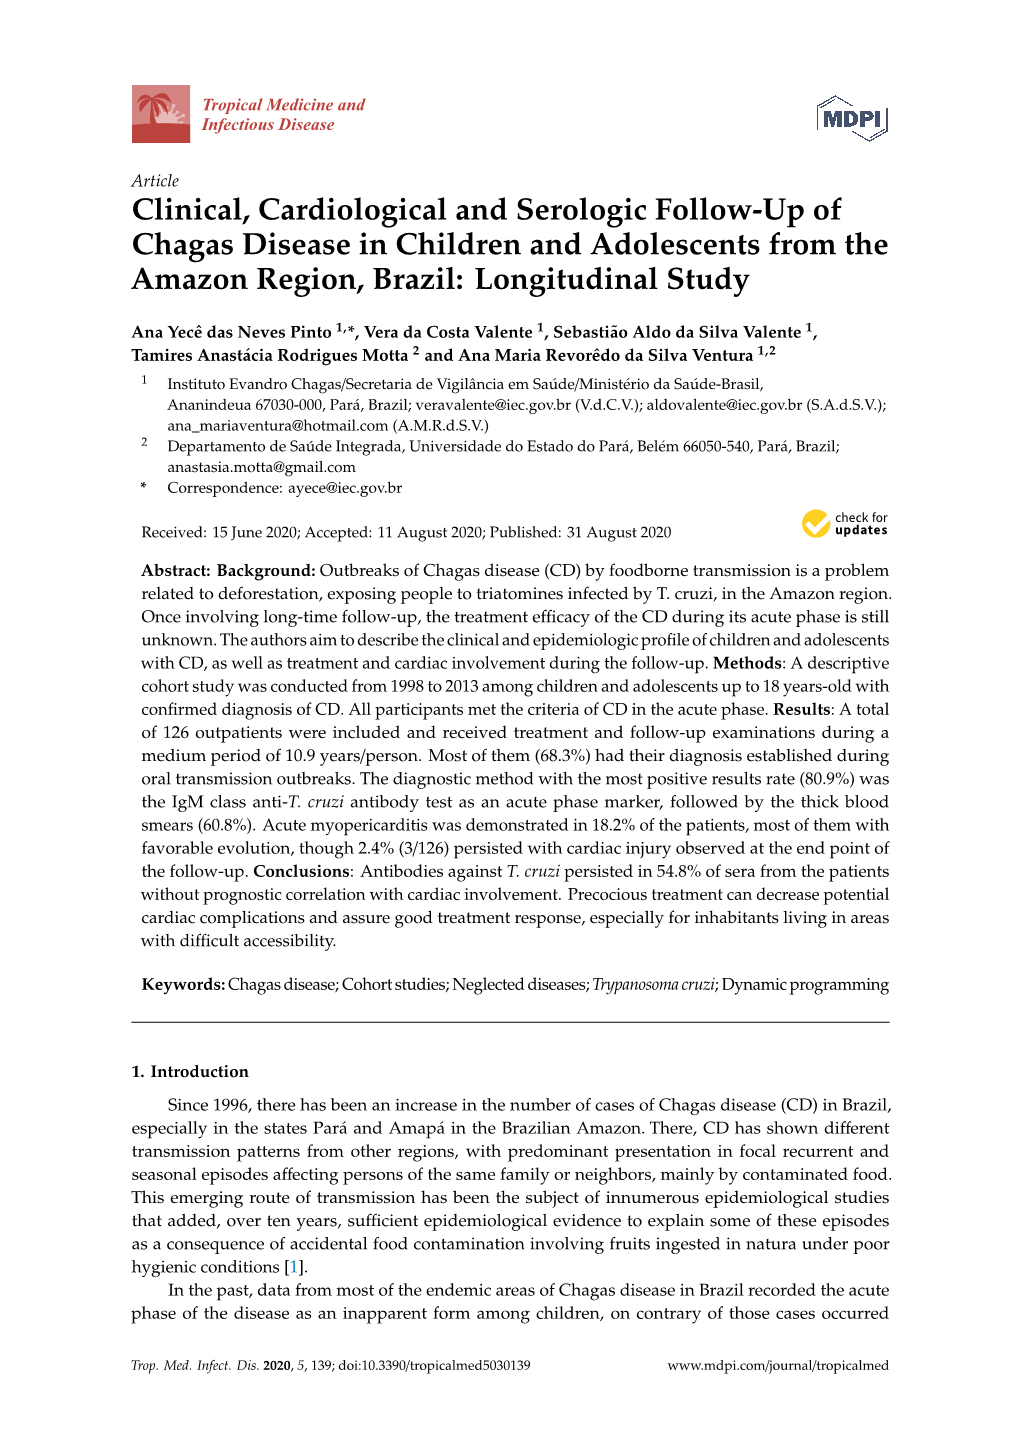 Clinical, Cardiological and Serologic Follow-Up of Chagas Disease in Children and Adolescents from the Amazon Region, Brazil: Longitudinal Study